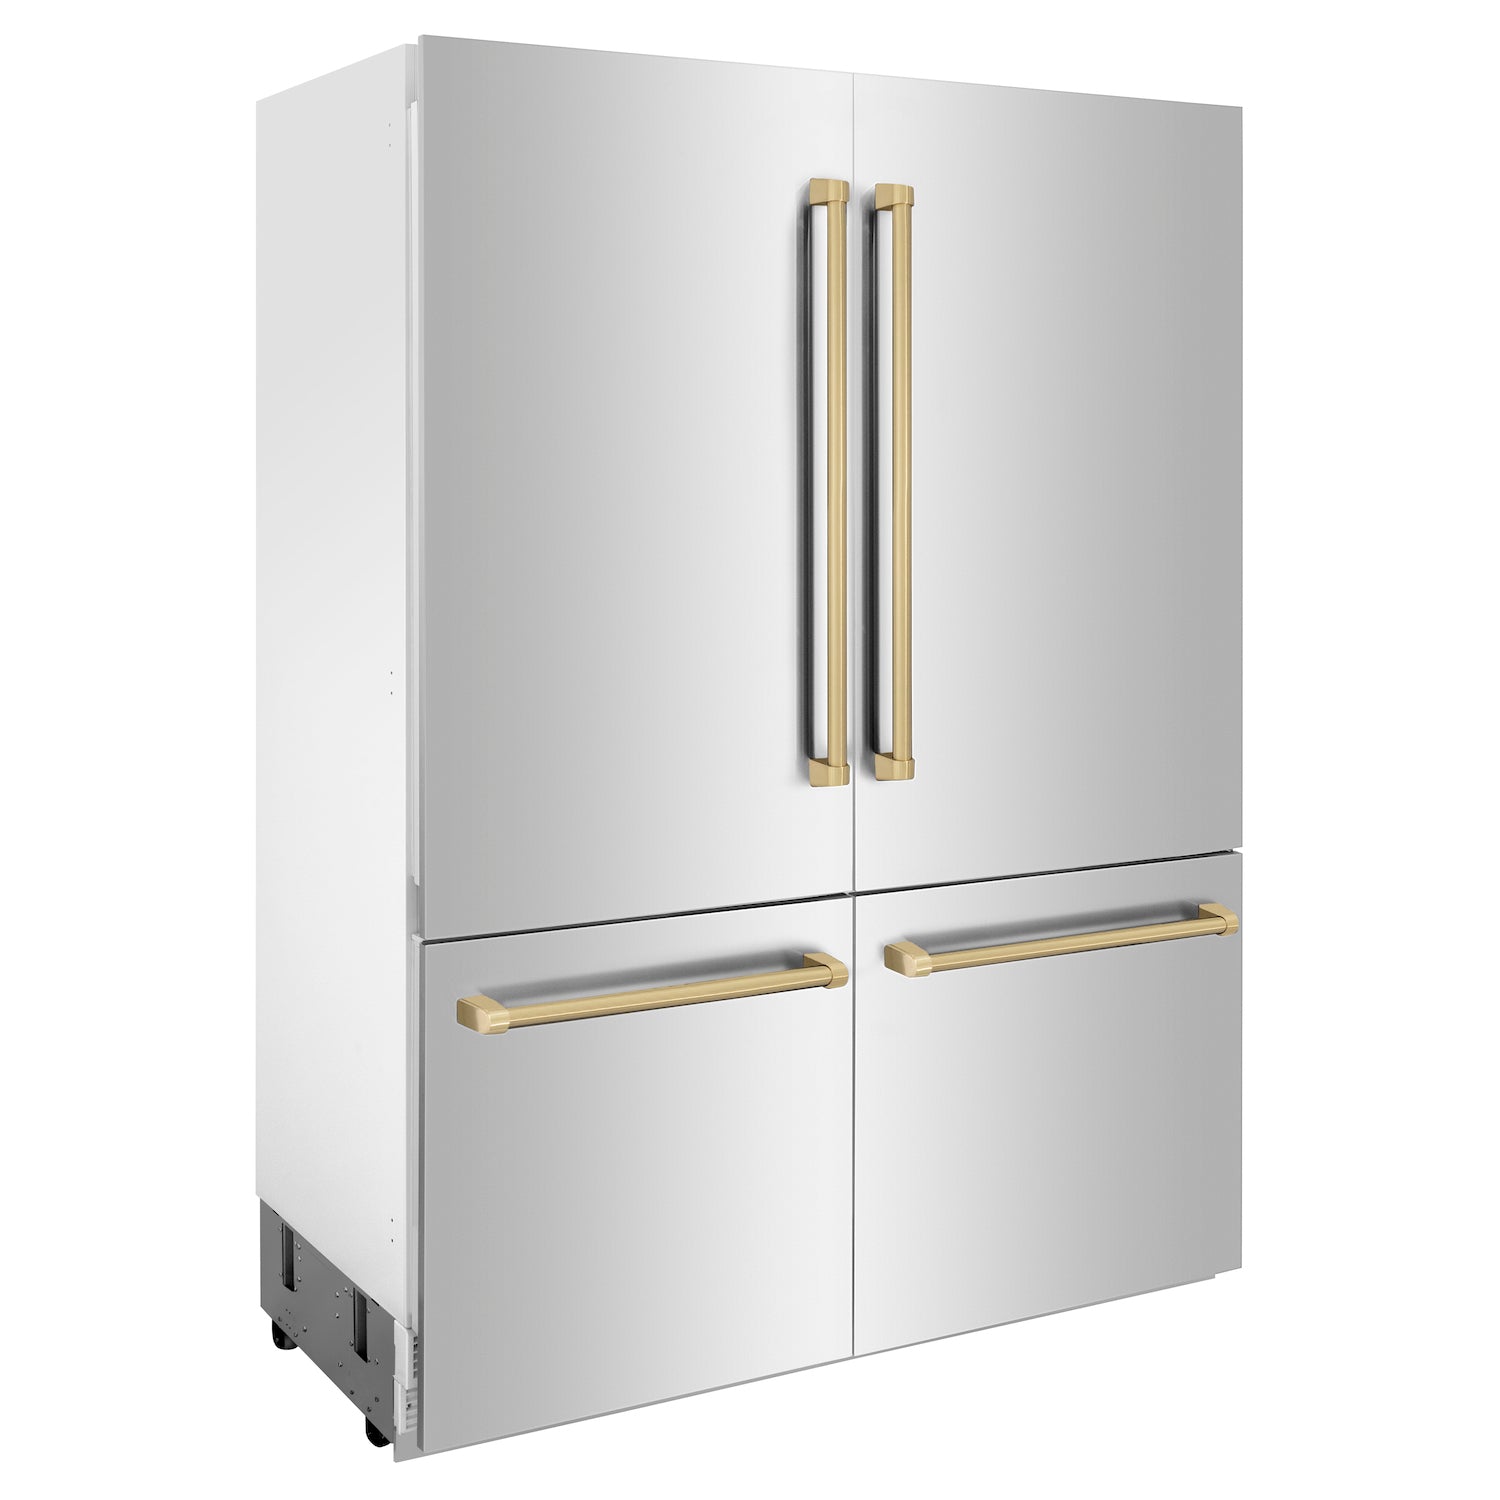 ZLINE Autograph Edition 60 in. 32.2 cu. ft. Built-in 4-Door French Door Refrigerator with Internal Water and Ice Dispenser in Stainless Steel with Champagne Bronze Accents (RBIVZ-304-60-CB) side, doors closed.